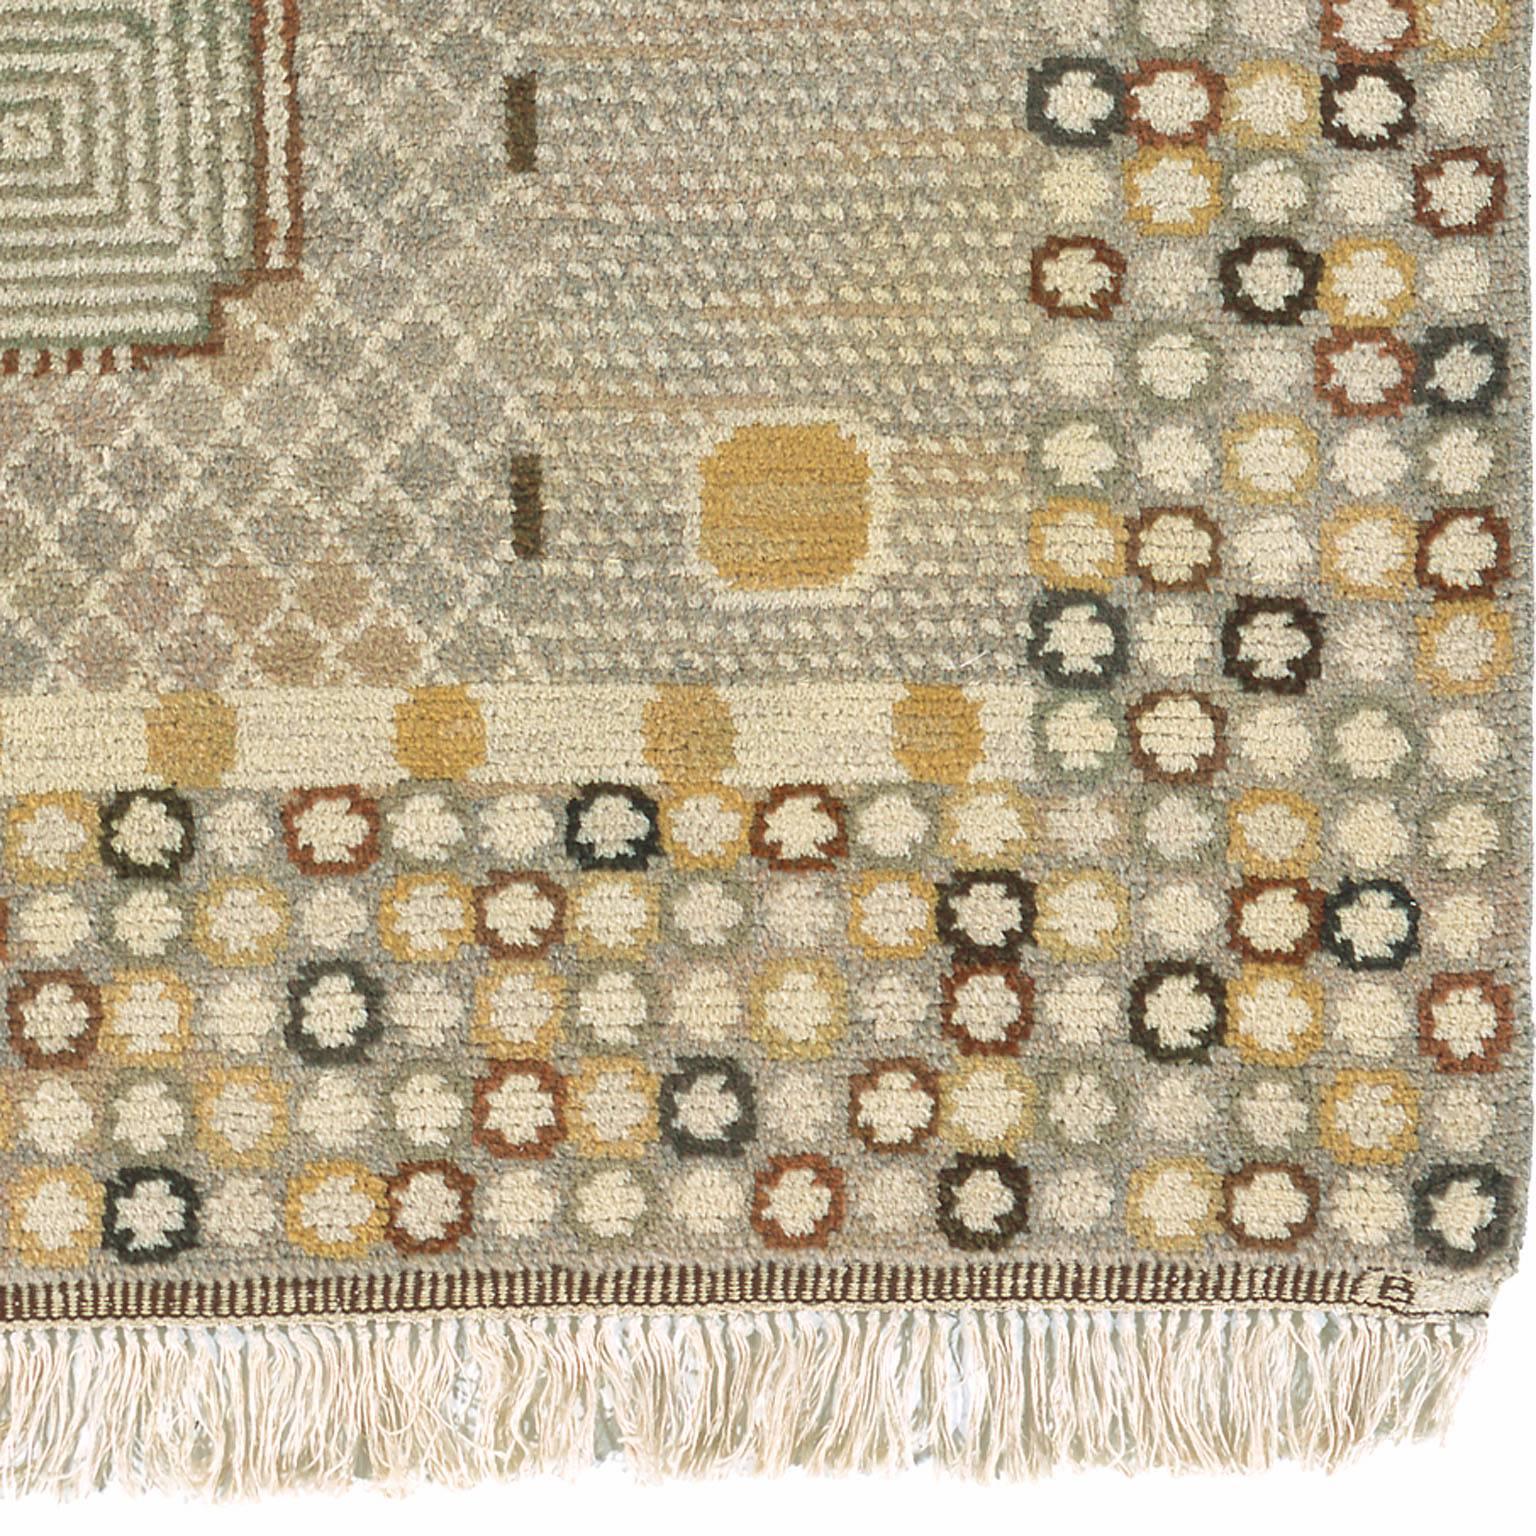 Mid-20th Century Swedish Pile Carpet by AB Märta Måås-Fjetterström  In Good Condition For Sale In New York, NY